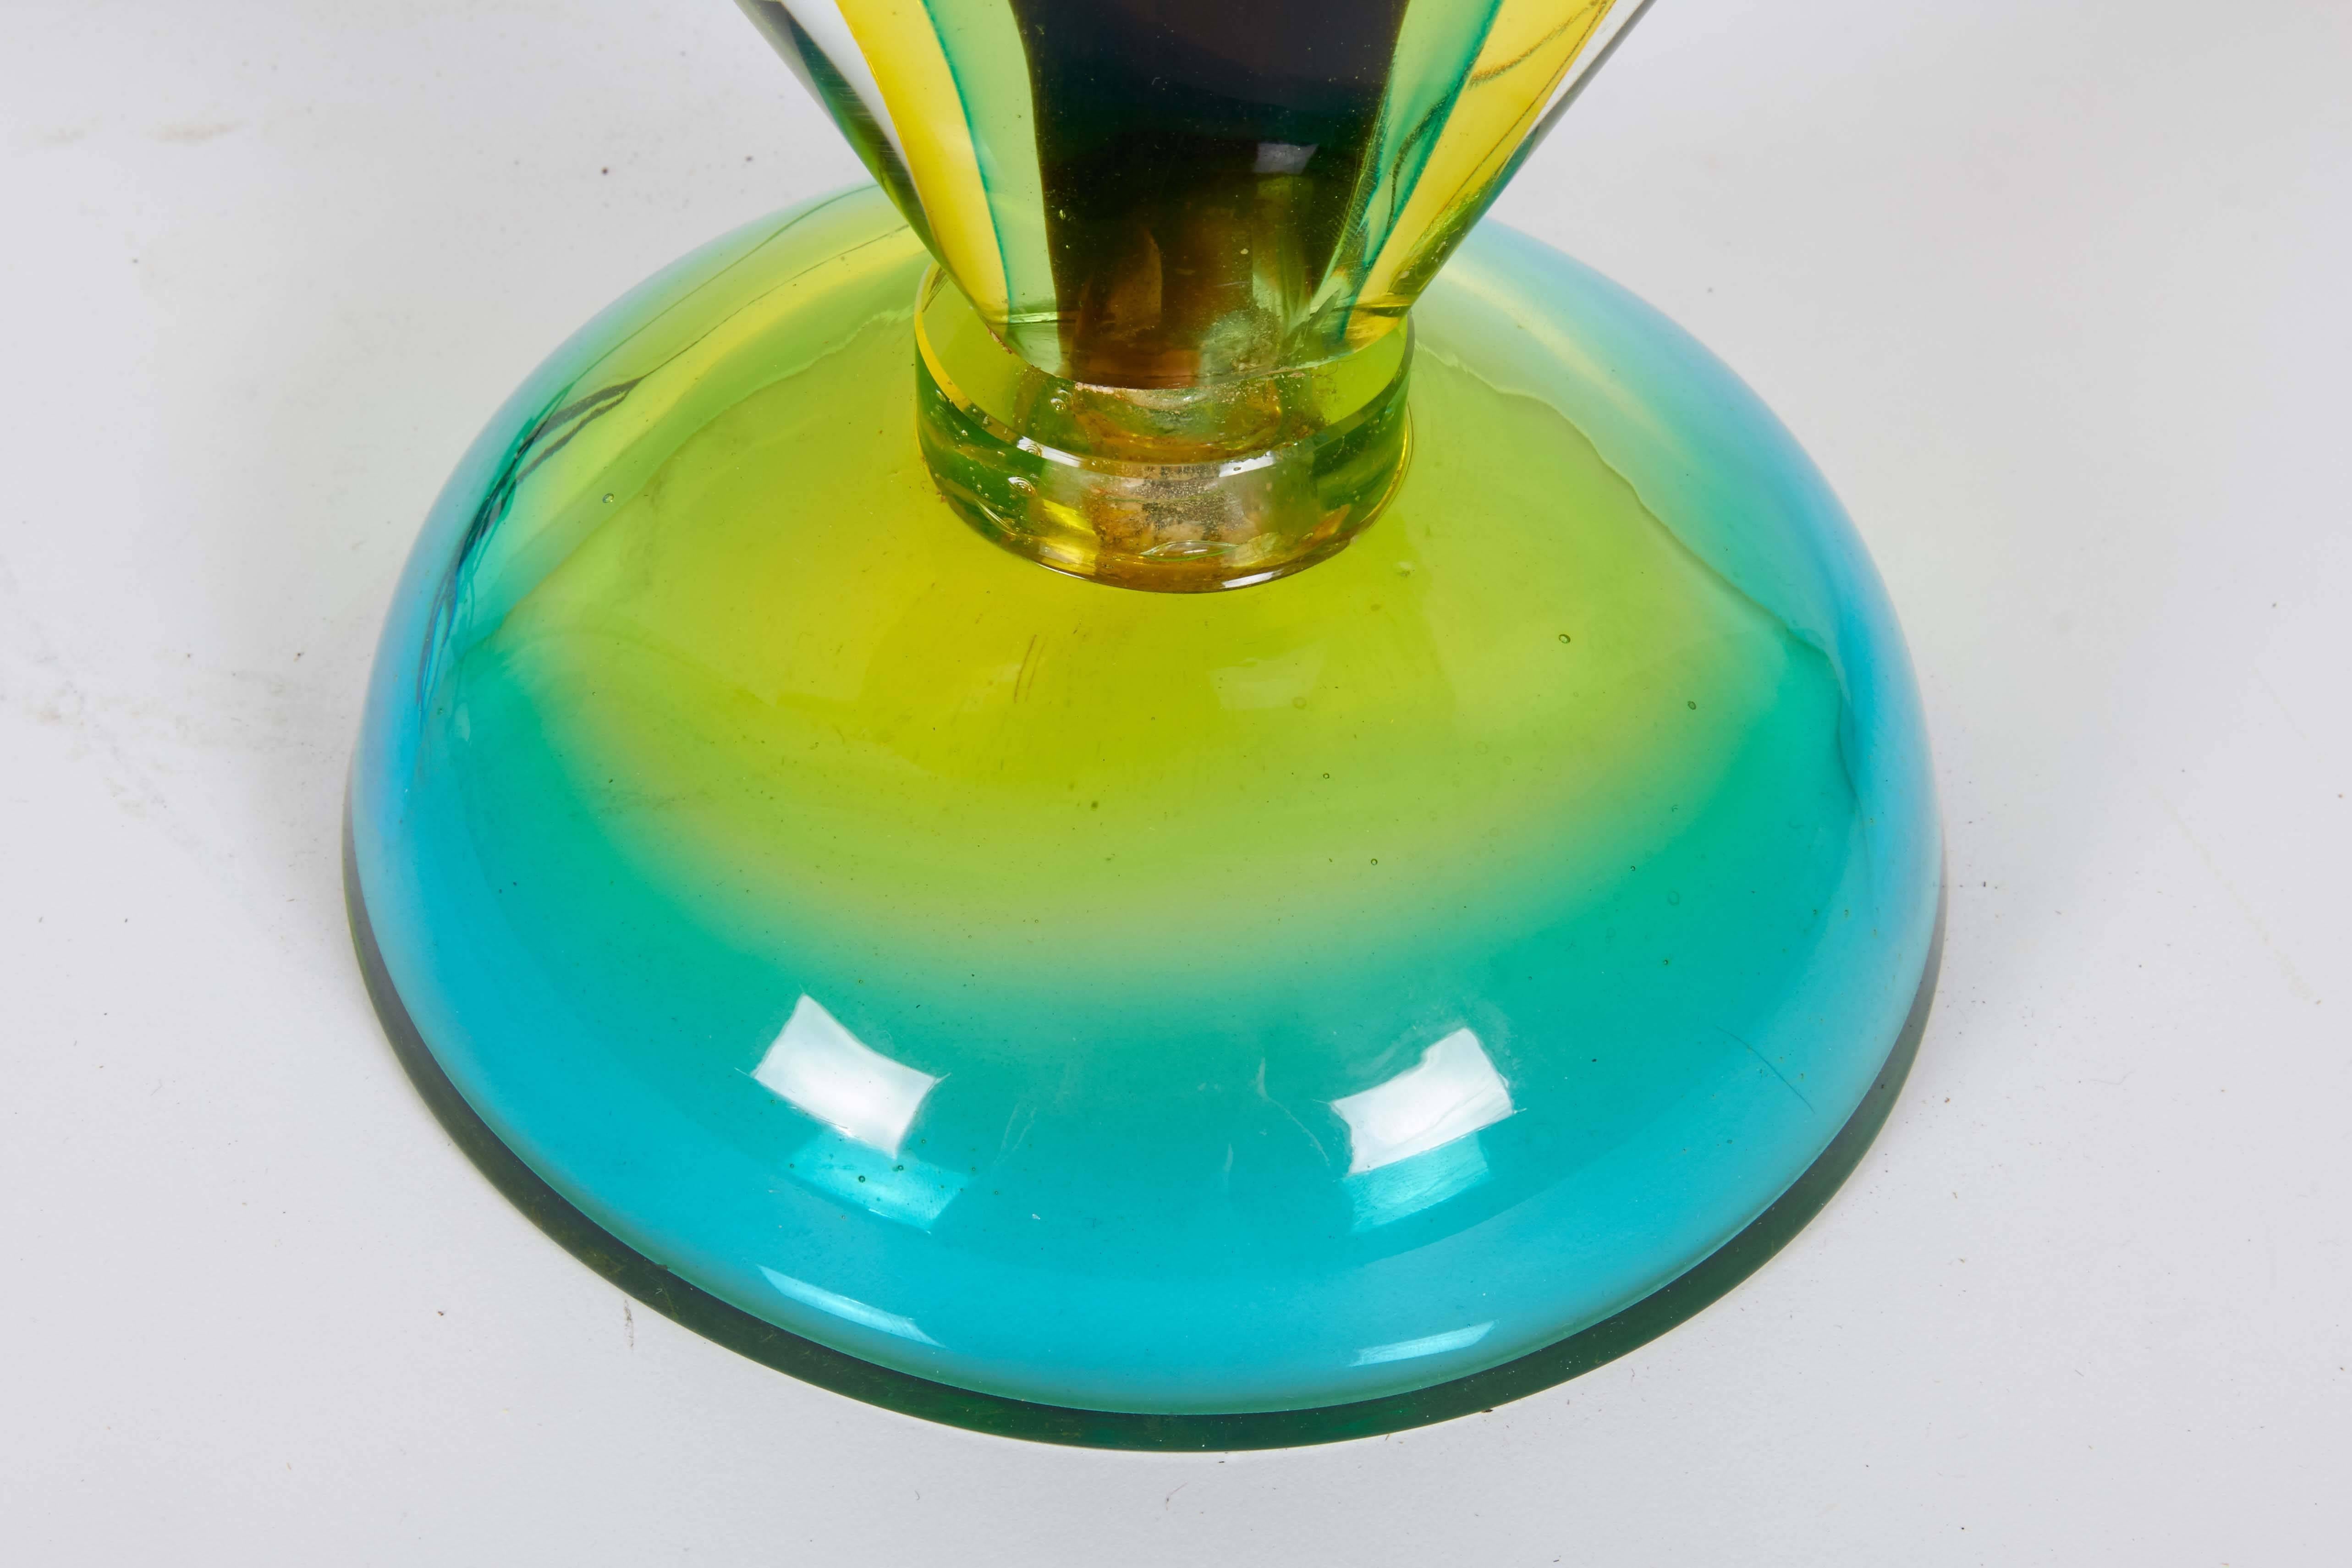 A vibrant Murano glass table lamp, manufactured circa, 1960s-1970s, with brass single socket mounted on body comprised of multicolored layers in brown, green, yellow and blue. Very good condition, wear consistent with age and use.

10423